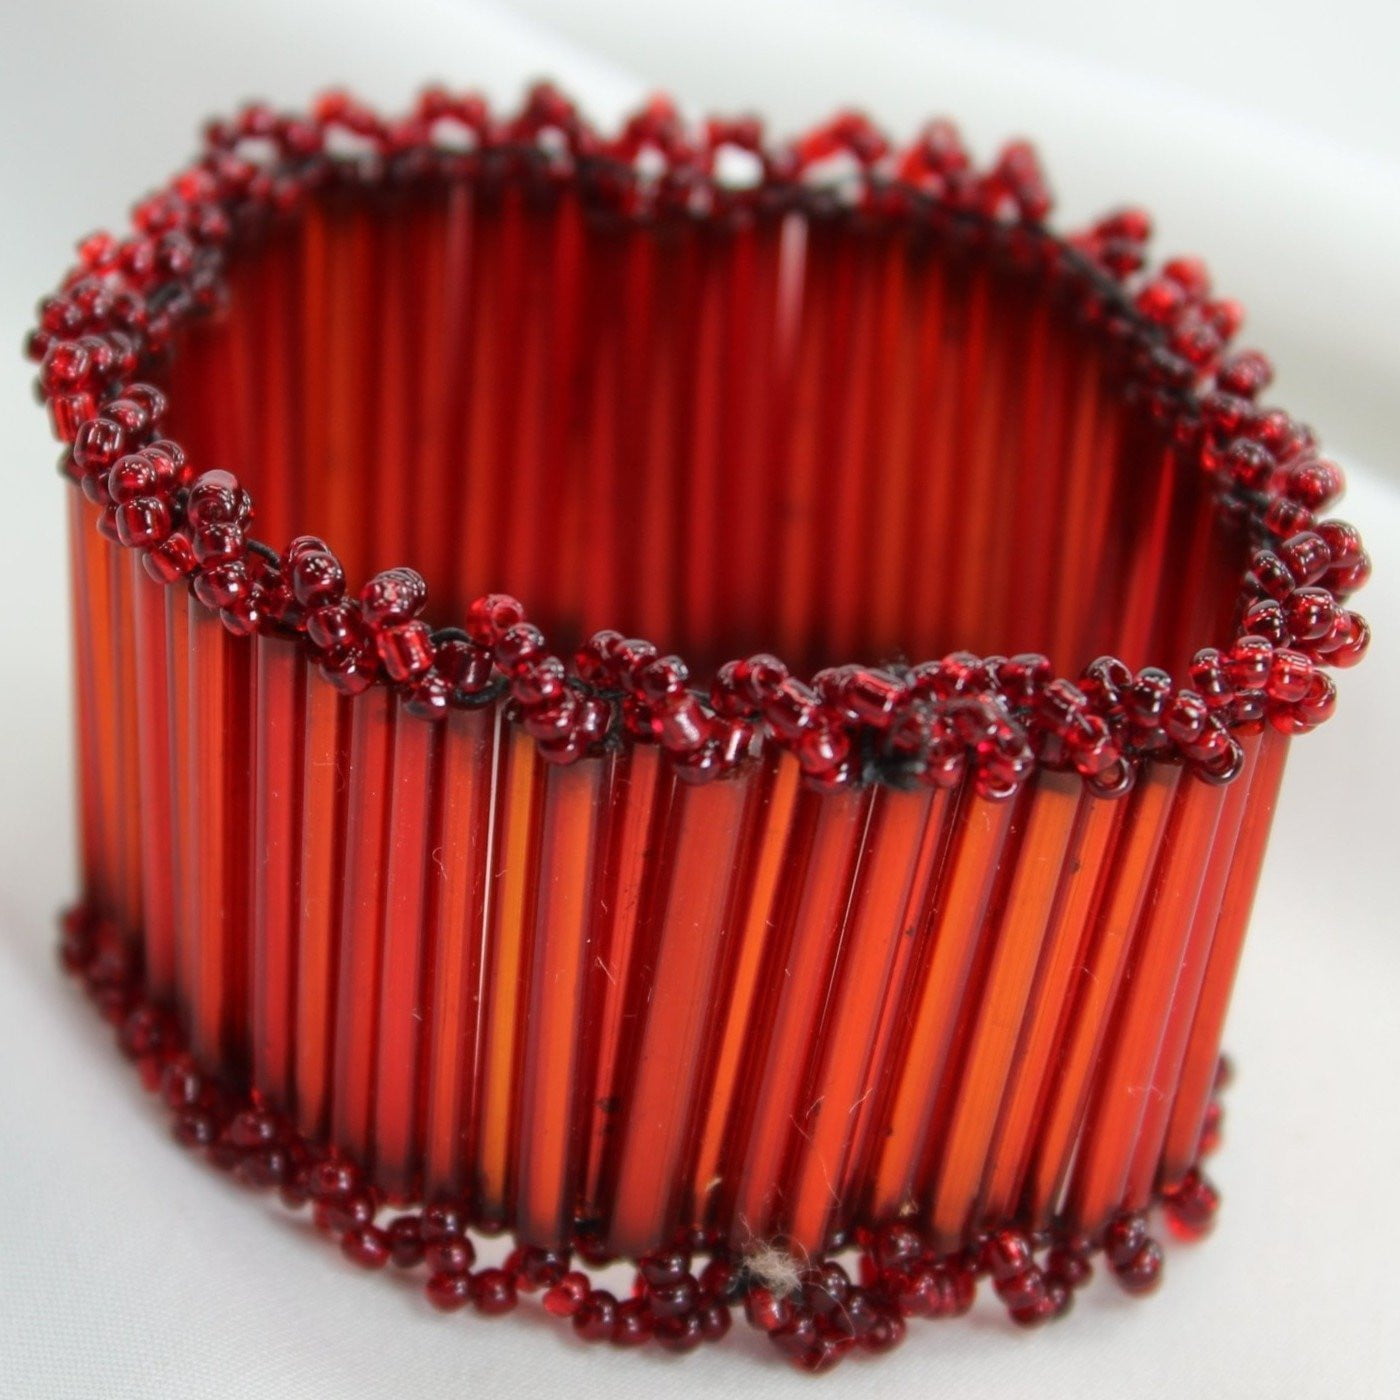 Artisan Red Iridescent Bead Bracelet Bugle Seed Glass Beads 1 1/4" Wide unique